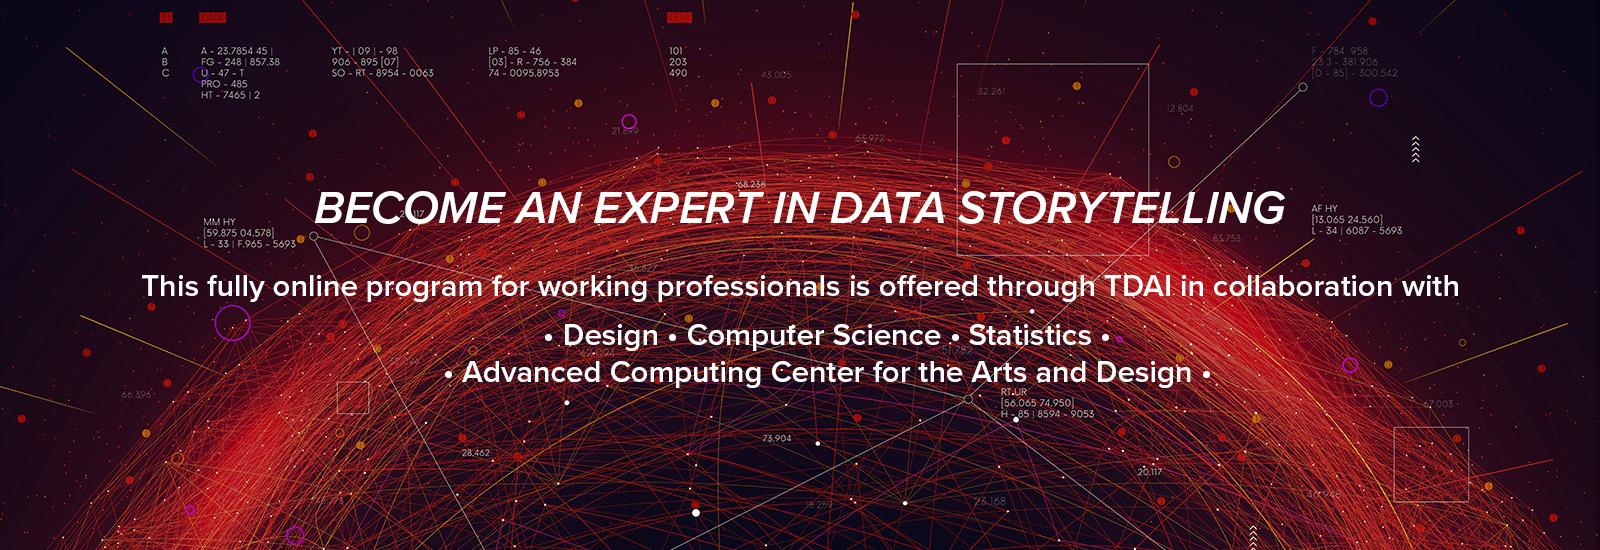 Become an Exerpt in Data Storytelling banner image